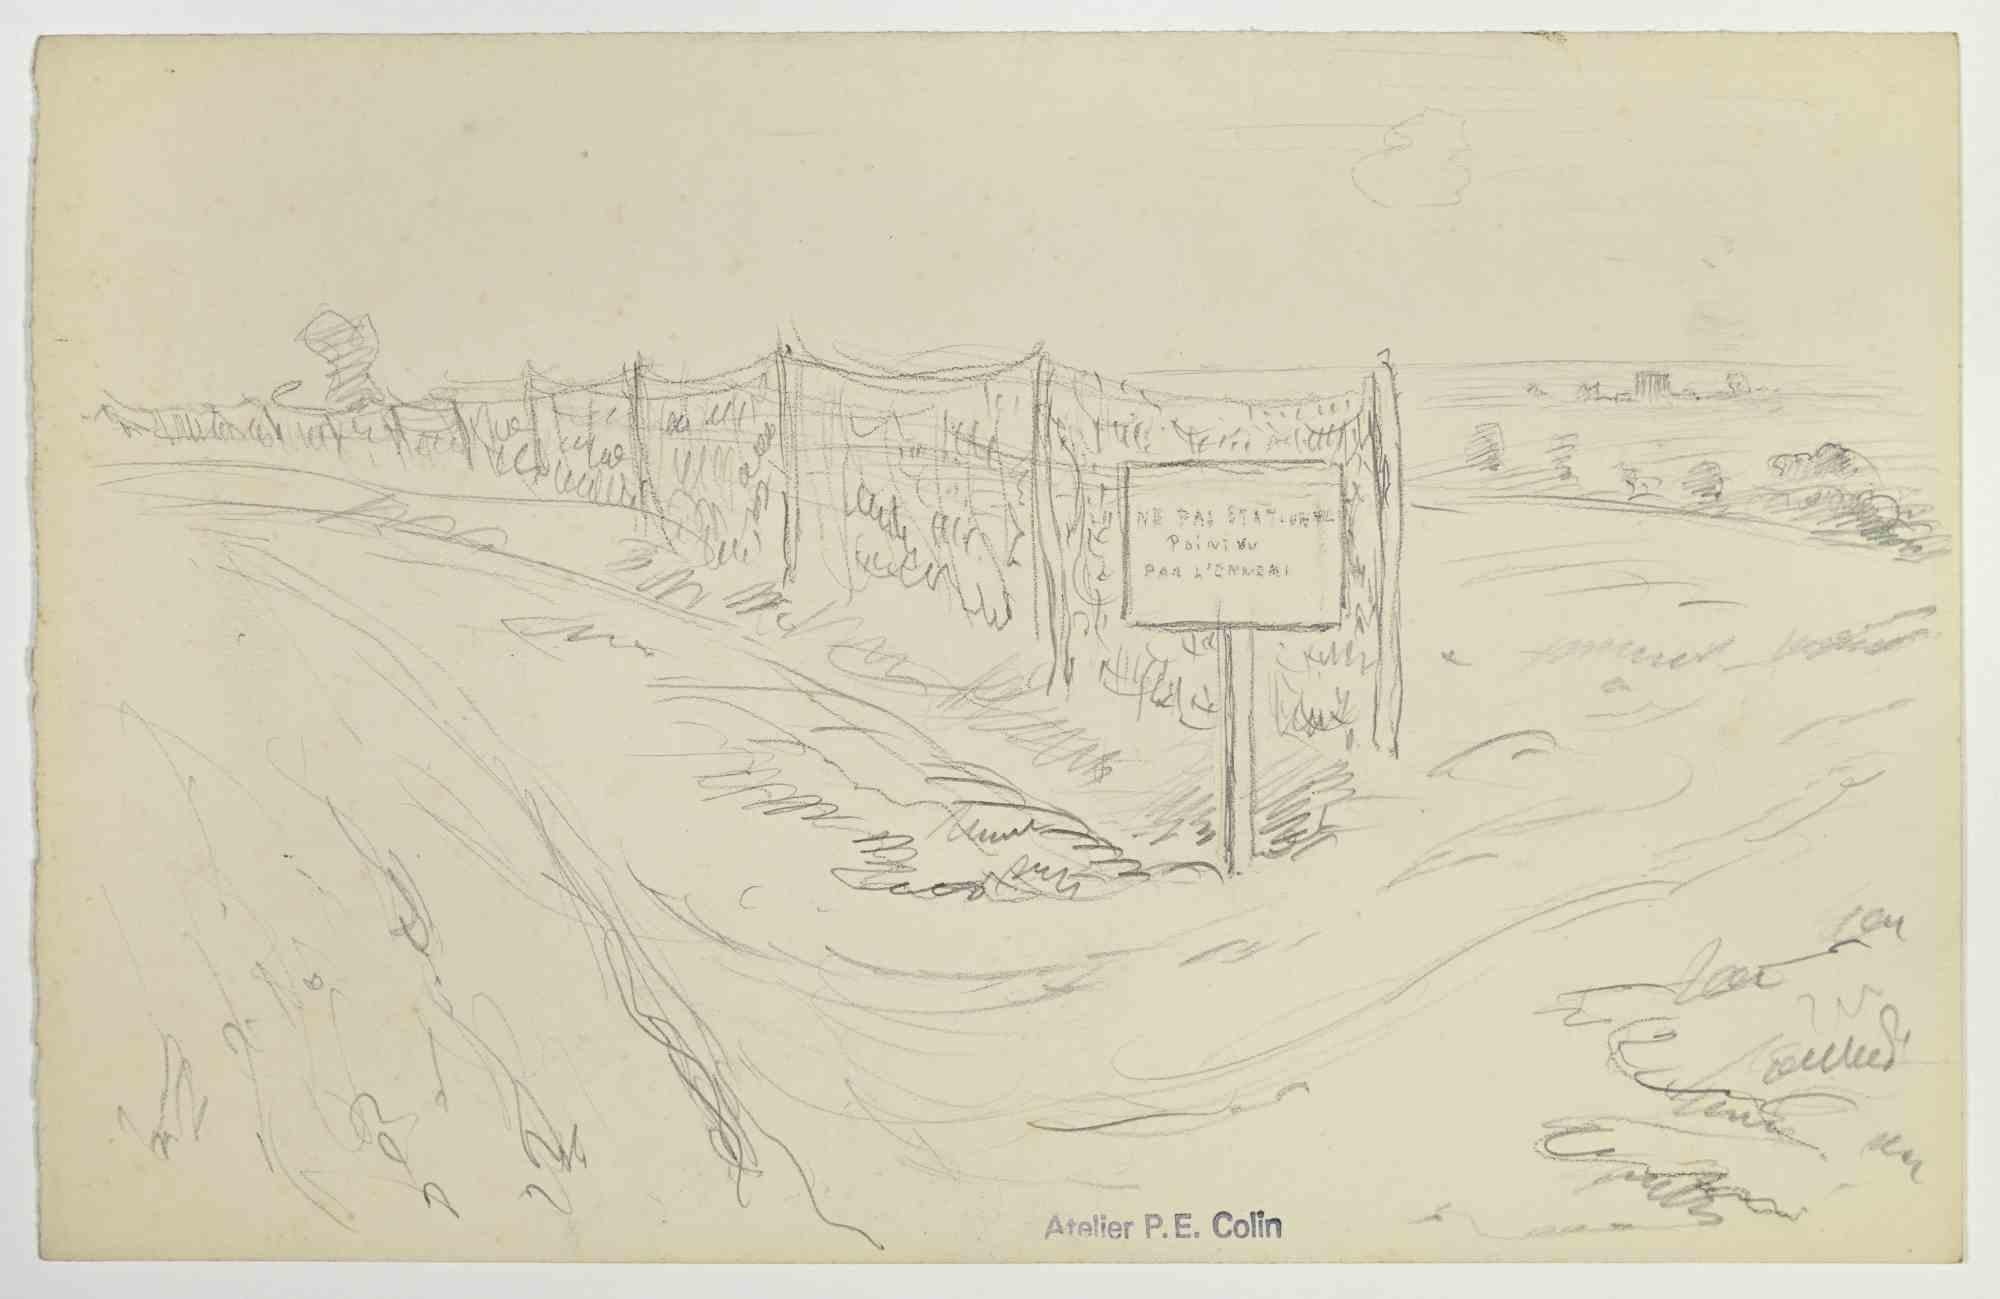 War Zone - Drawing by Paul Emile Colin - Early-20th century